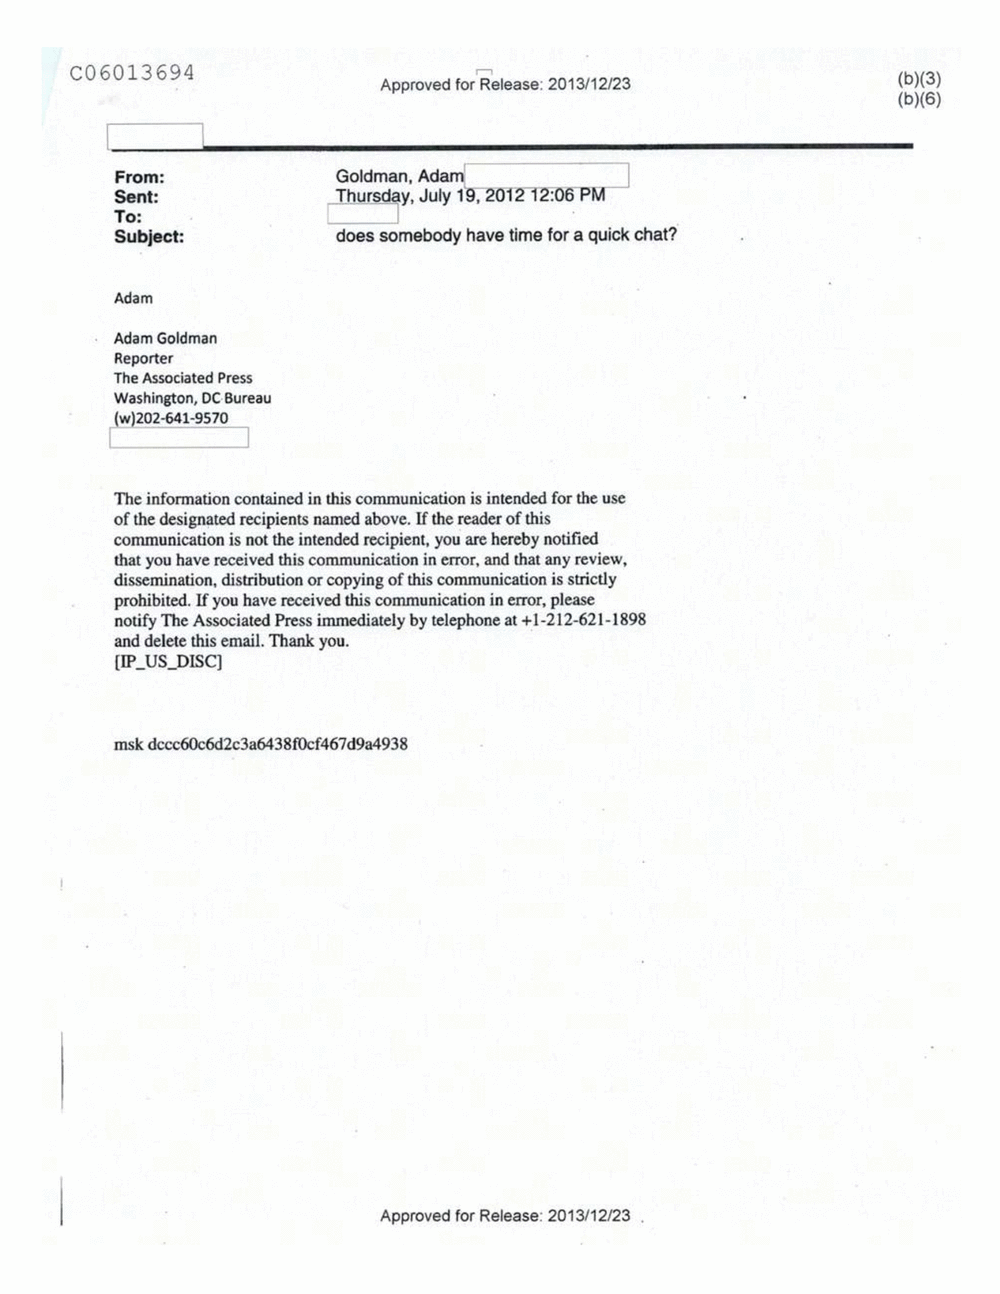 Page 556 from Email Correspondence Between Reporters and CIA Flacks